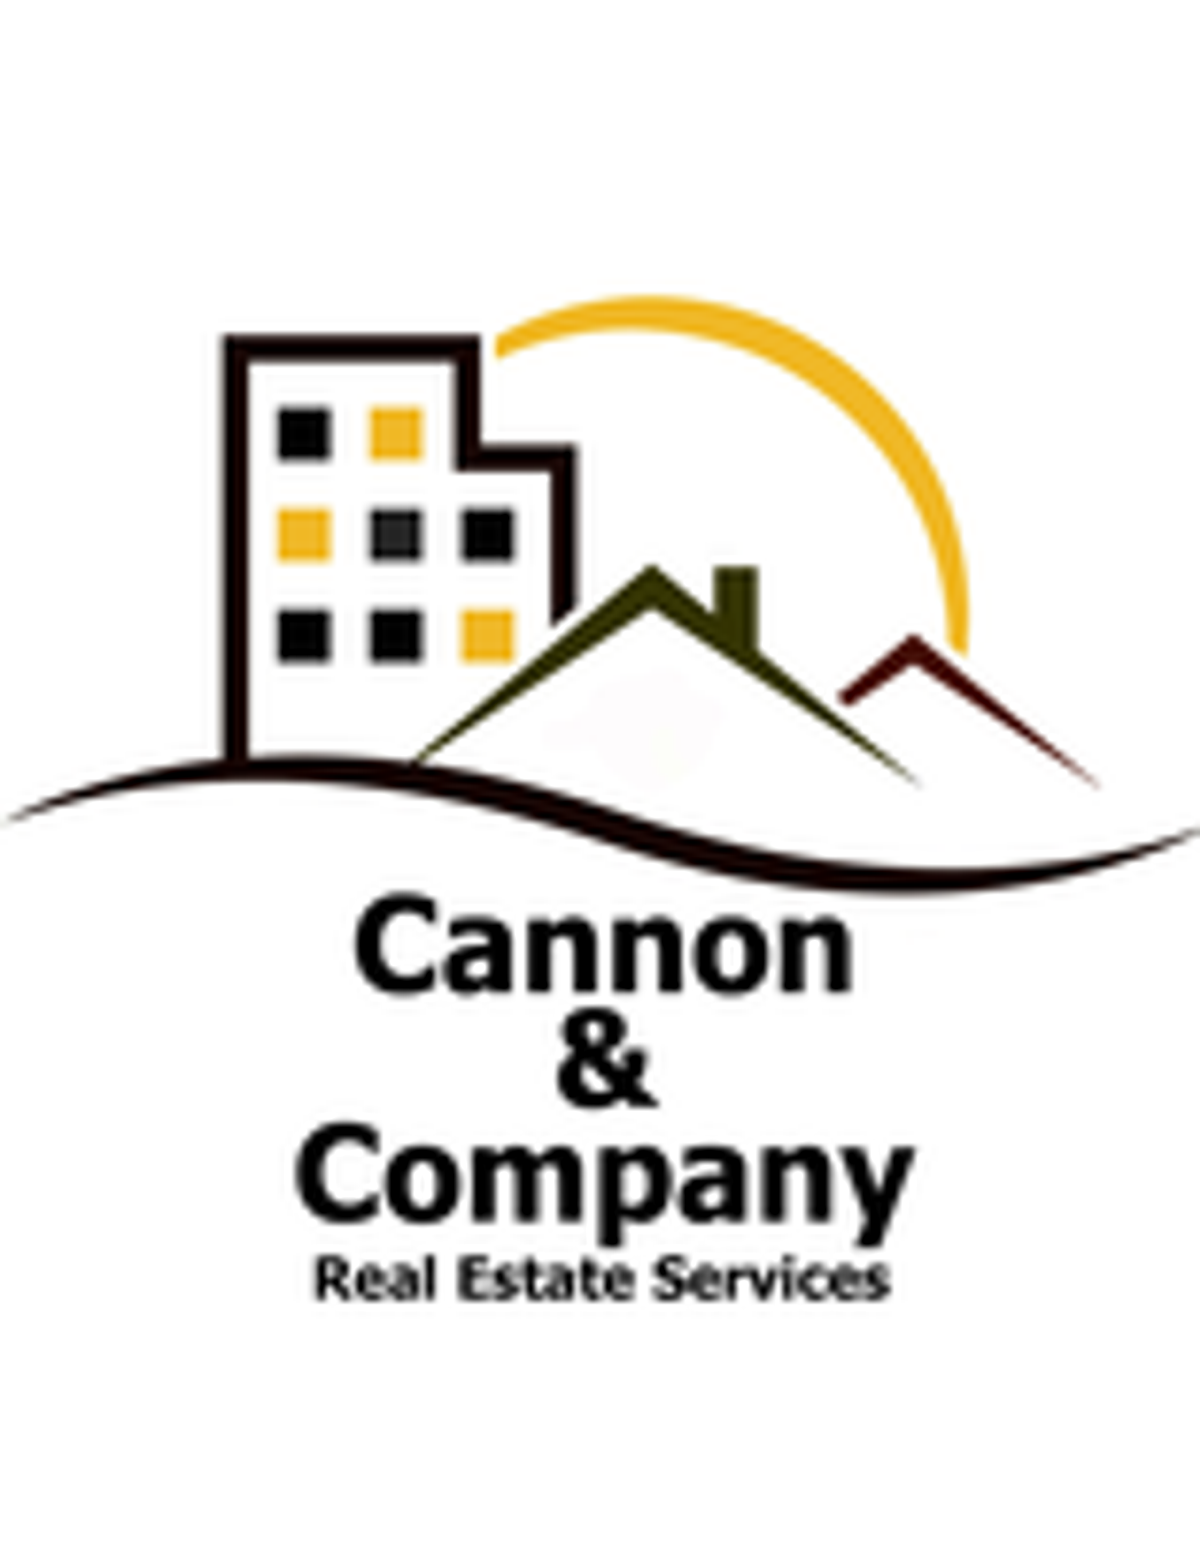 Photo for Gary Cannon, Listing Agent at Cannon & Company